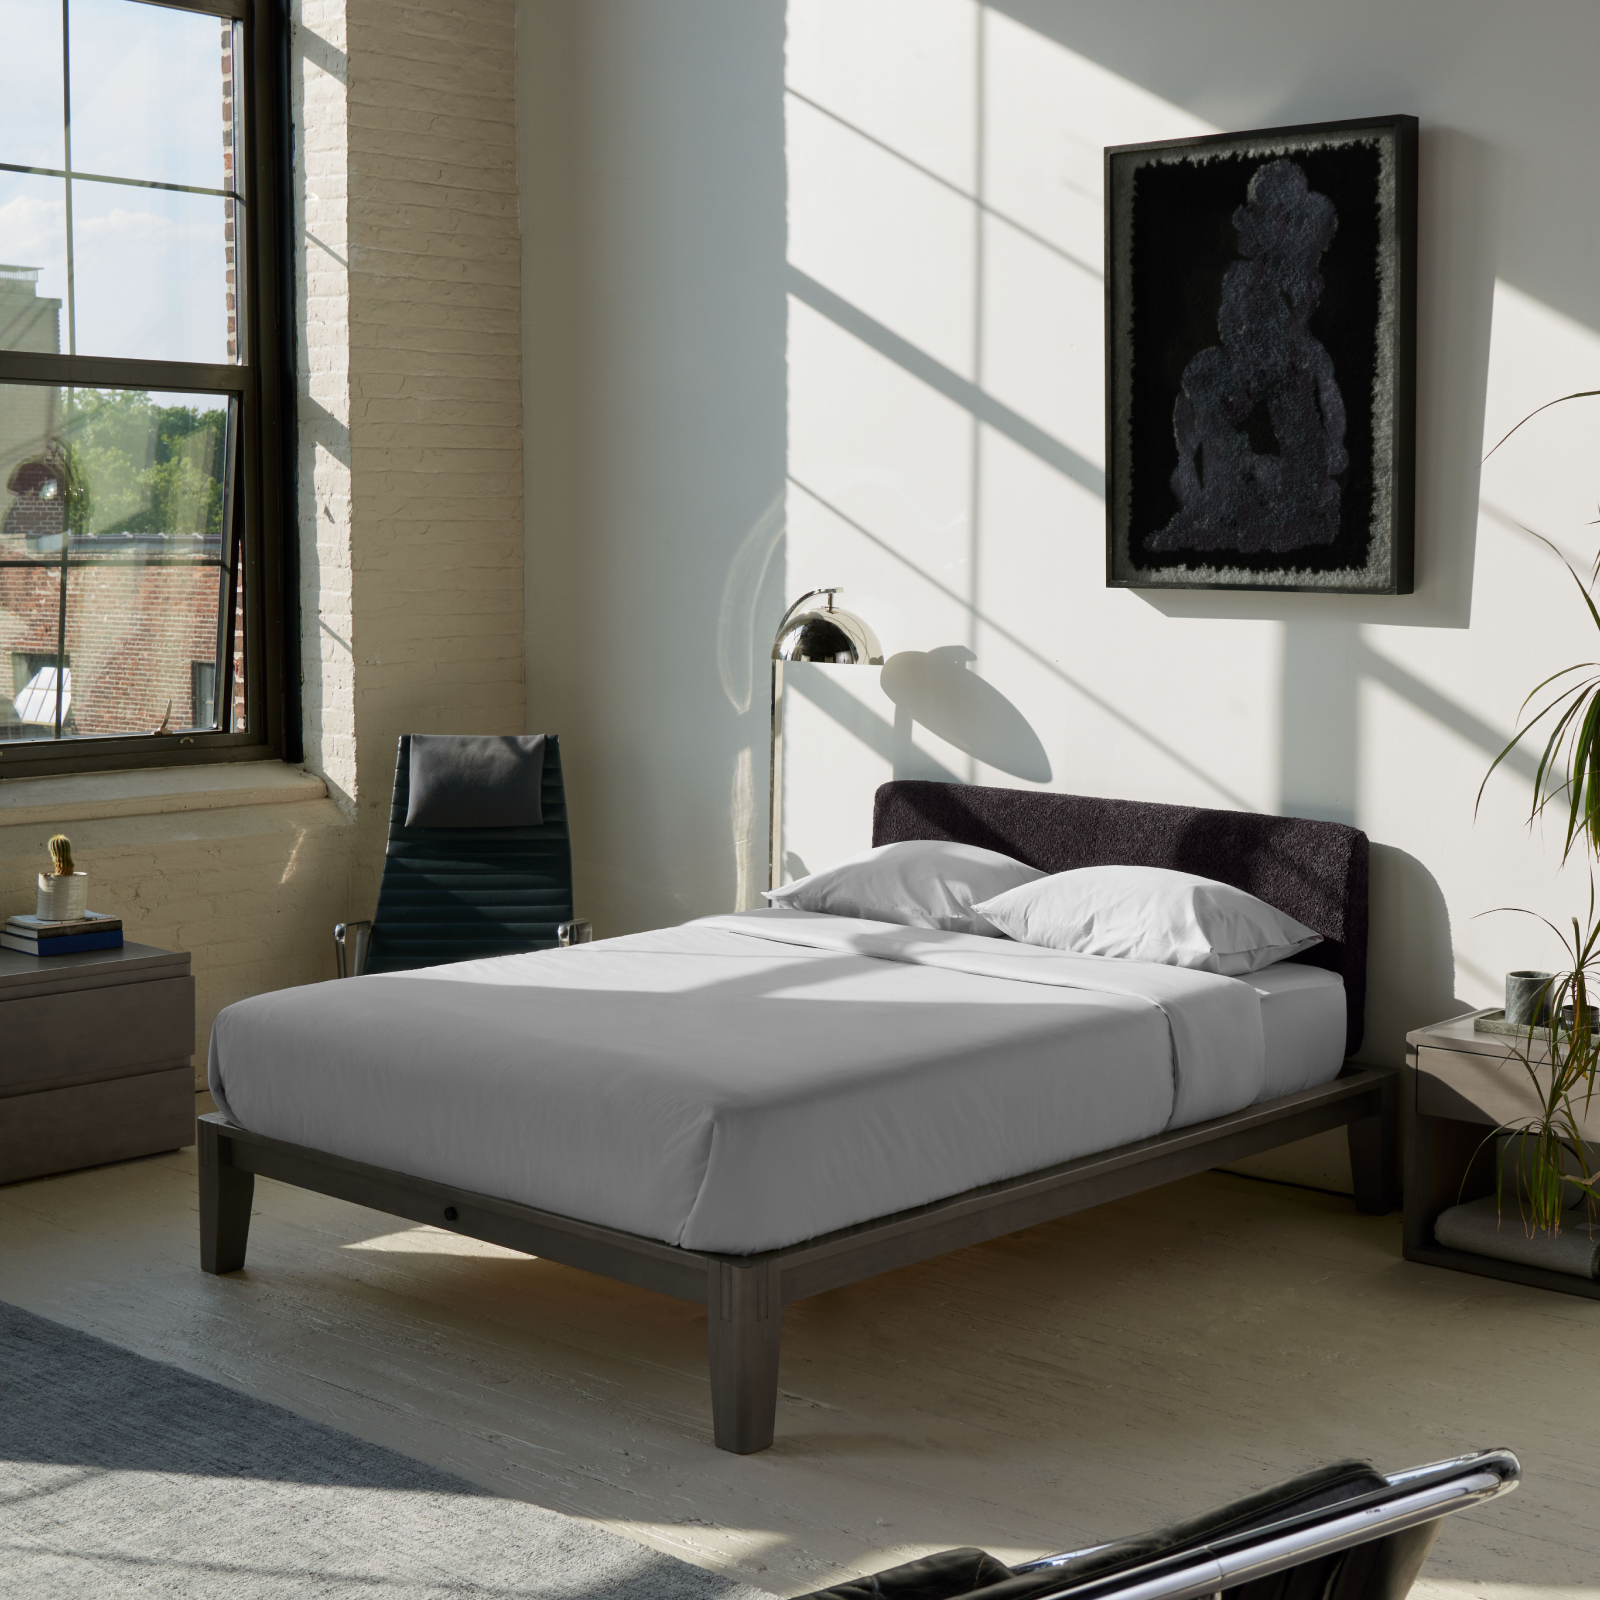 Beds LP - Look Book (The Bed + PB, in Grey) - MB Card